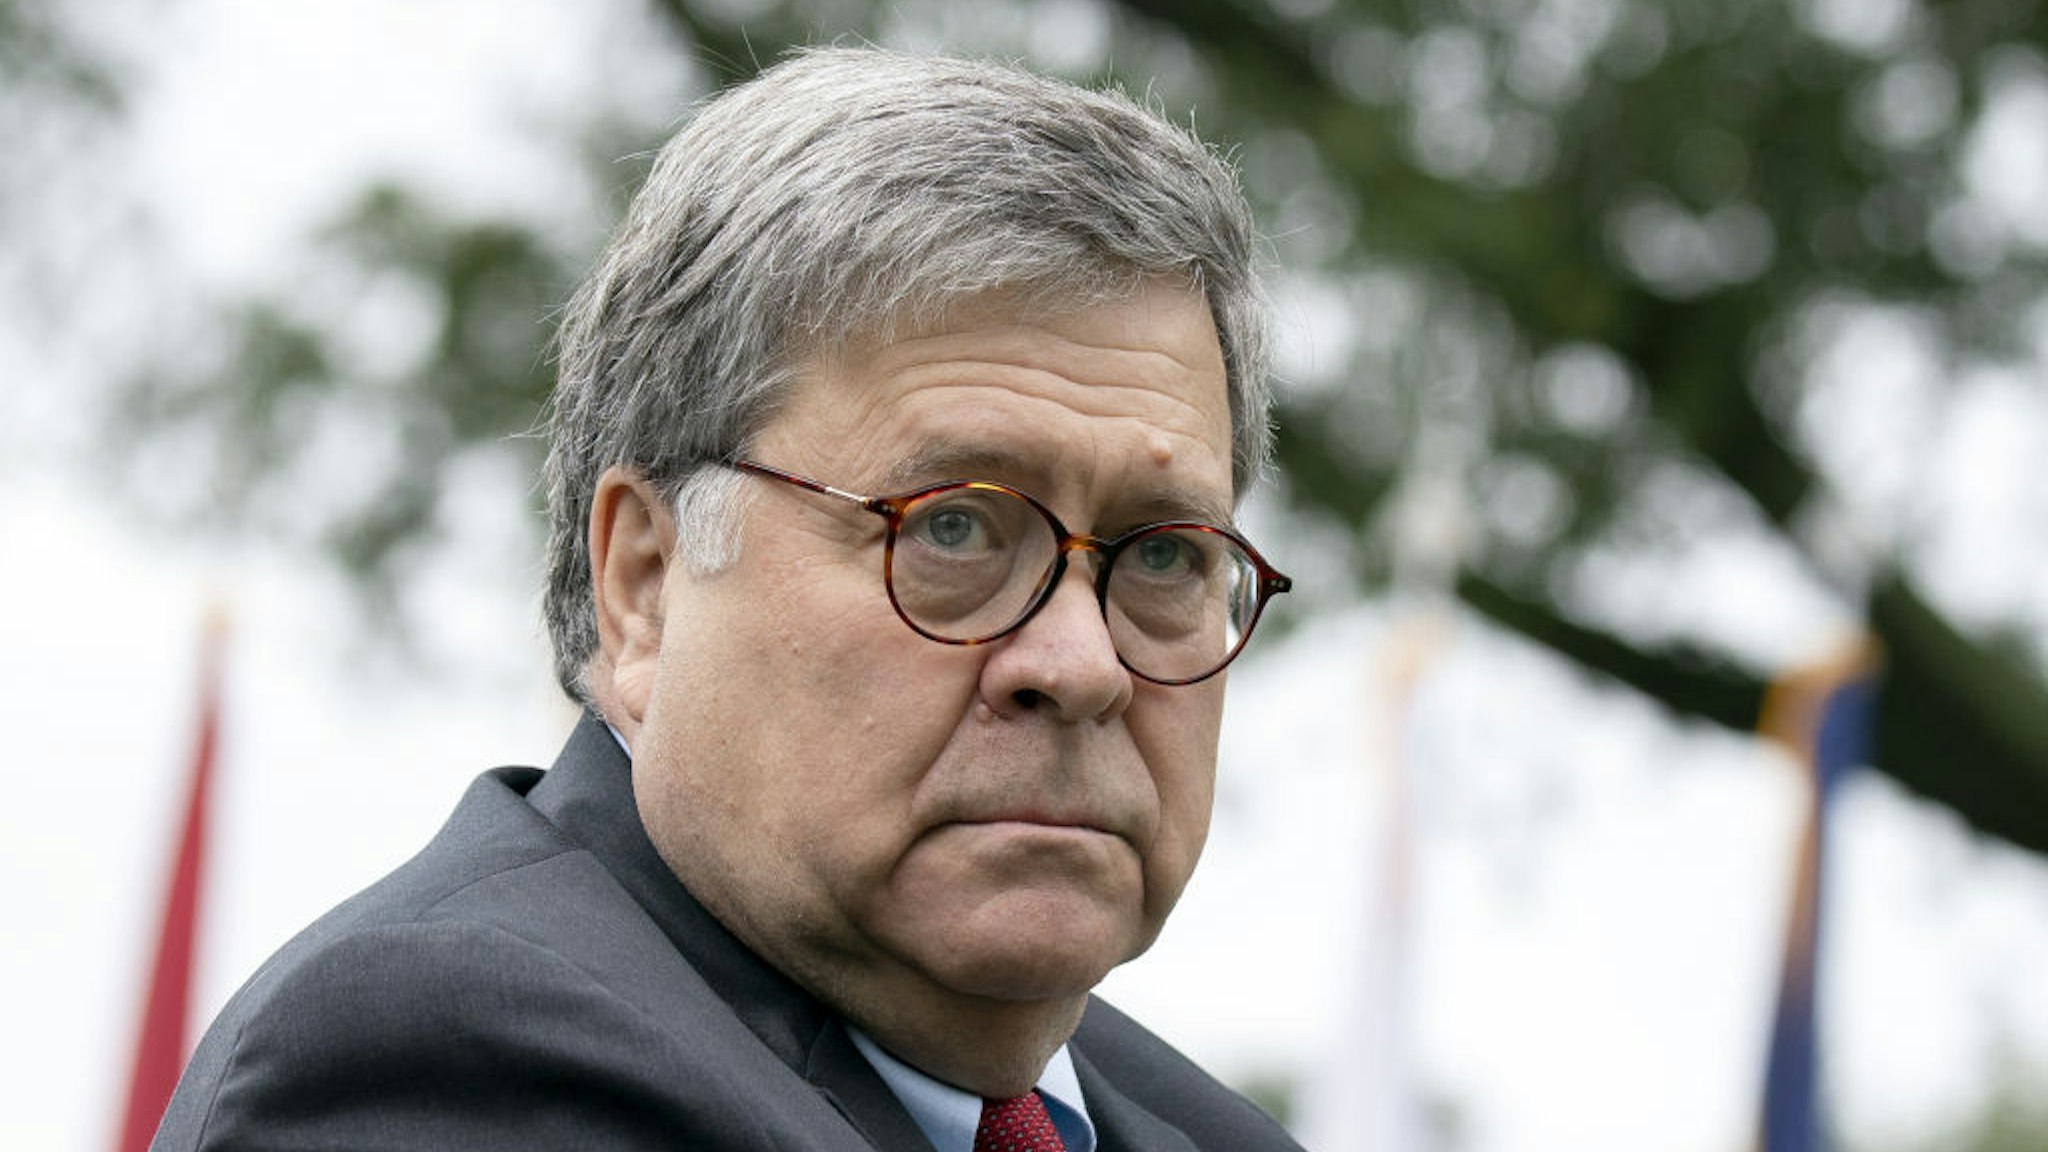 William Barr, U.S. attorney general, arrives for the announcement of U.S. President Donald Trump's nominee for associate justice of the U.S. Supreme Court during a ceremony in the Rose Garden of the White House in Washington, D.C., U.S., on Saturday, Sept. 26, 2020.